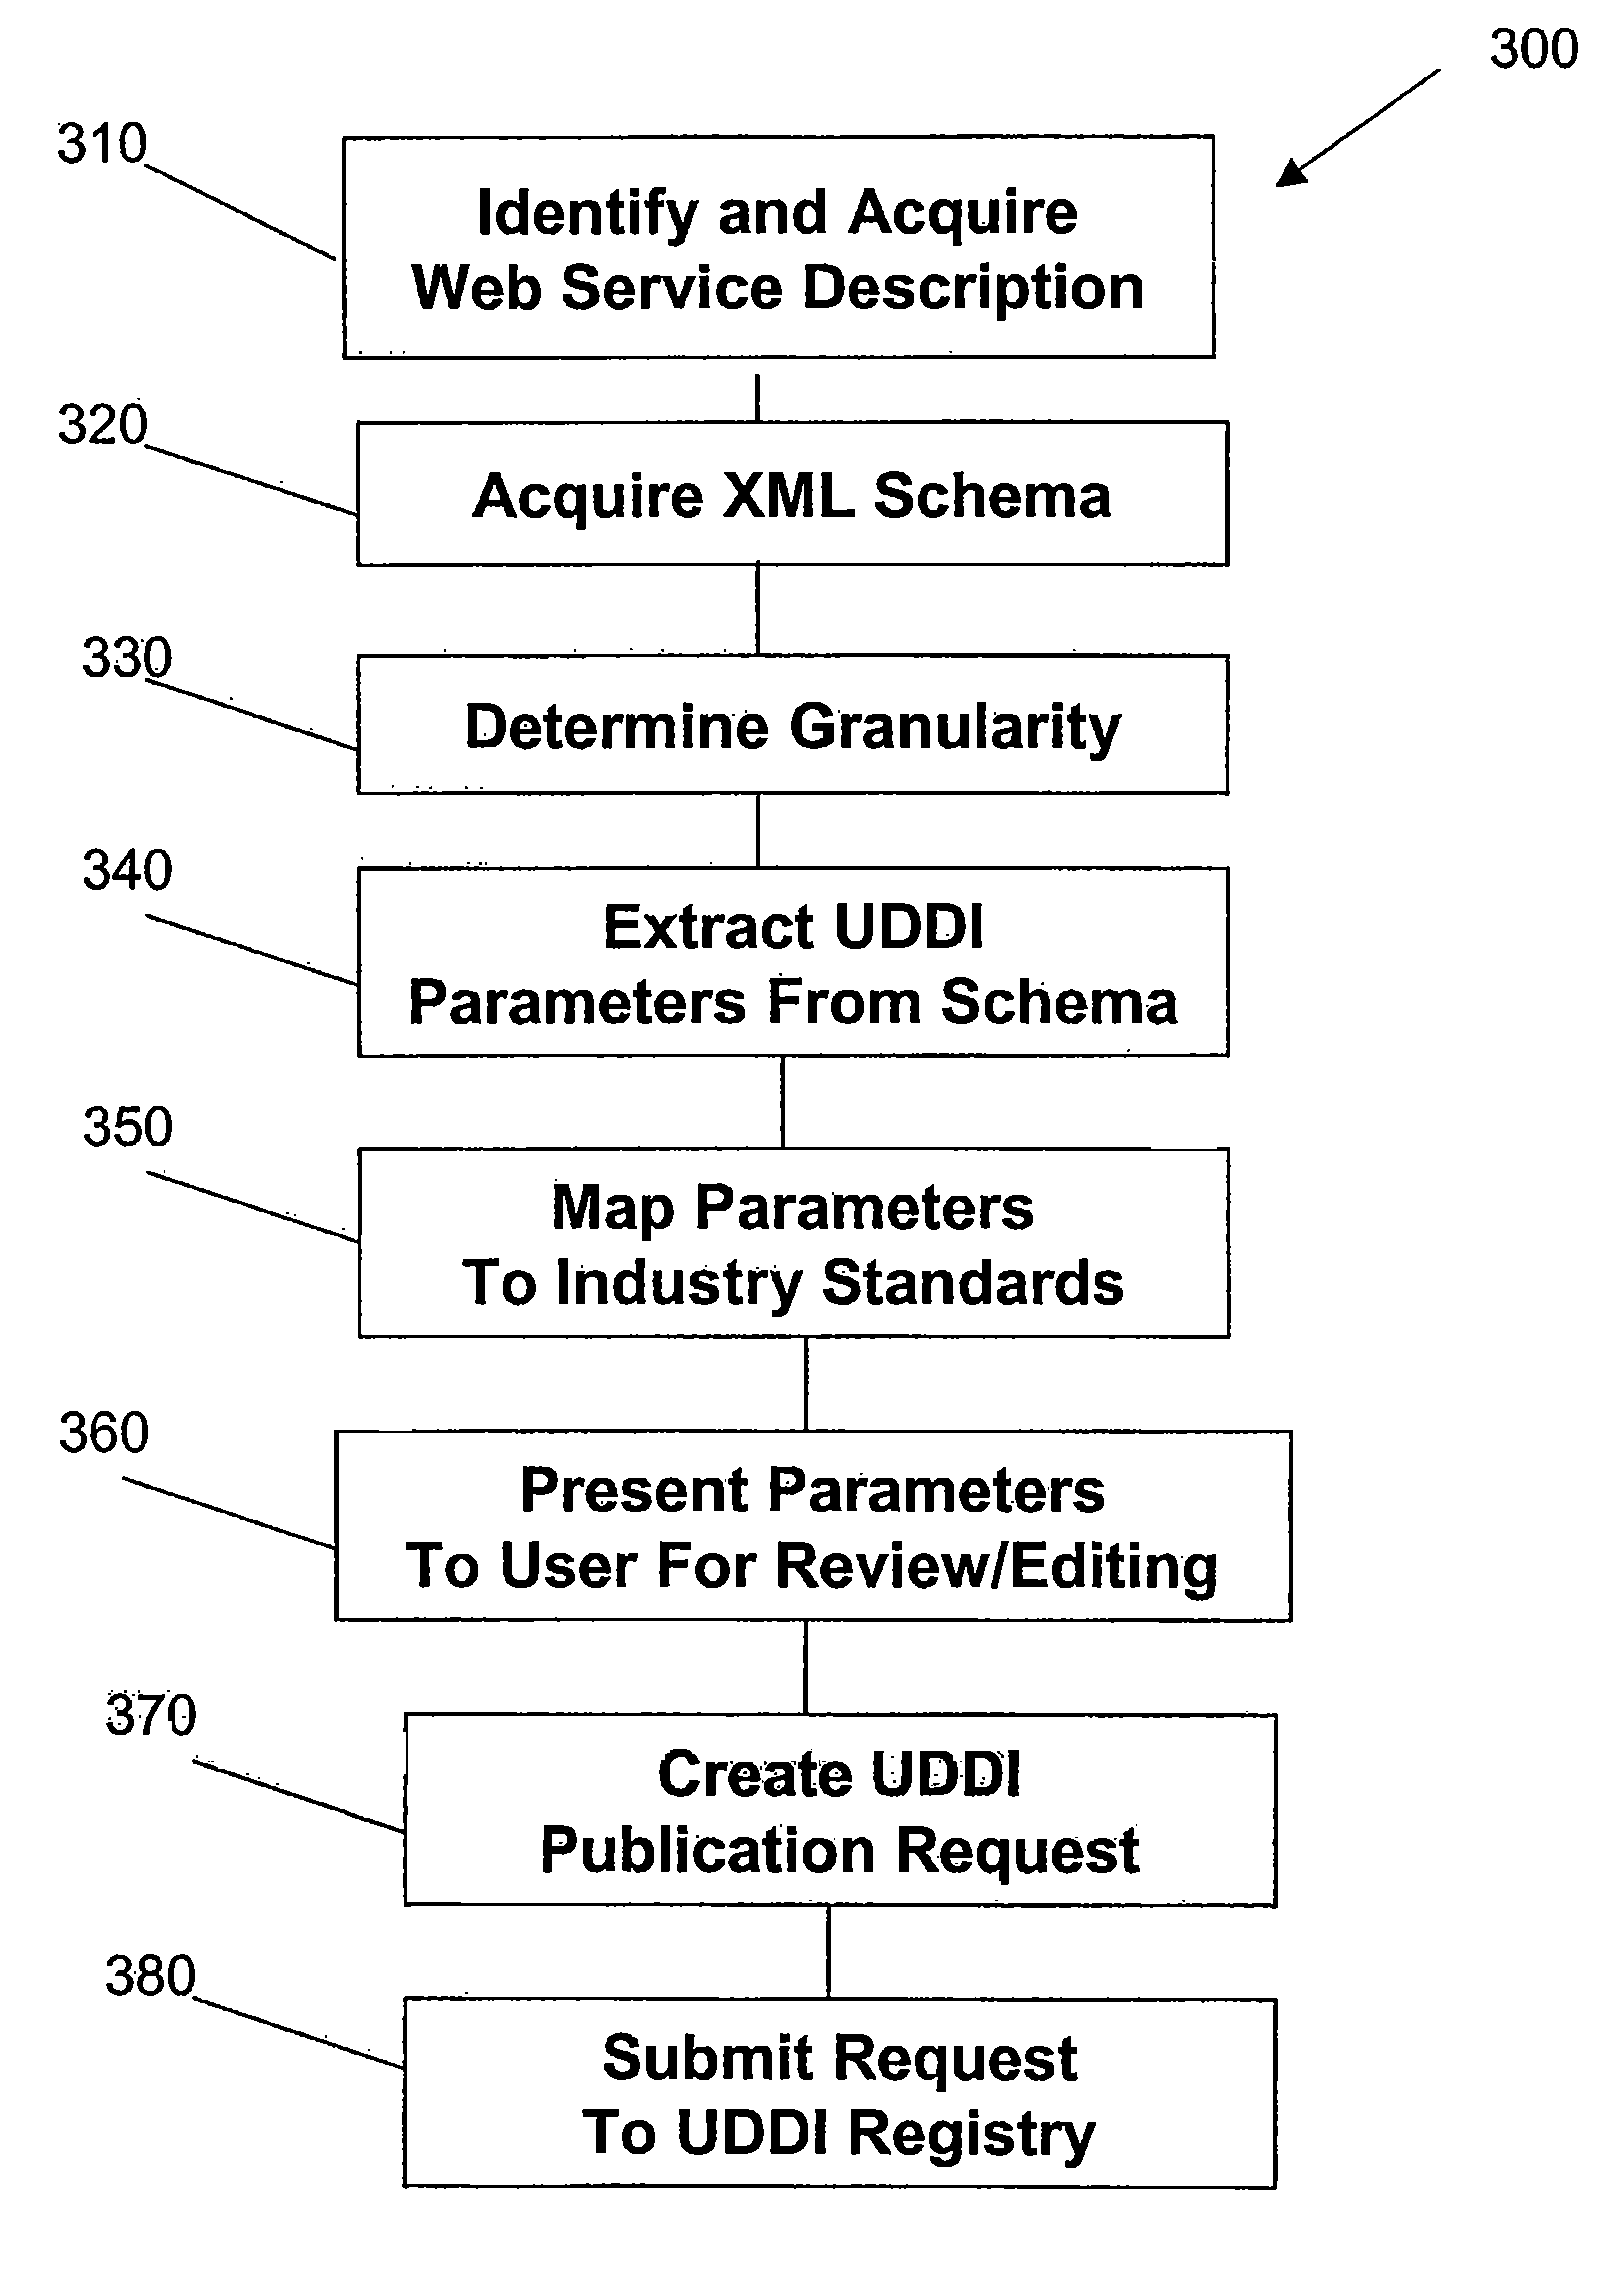 Semantic interface for publishing a web service to and discovering a web service from a web service registry